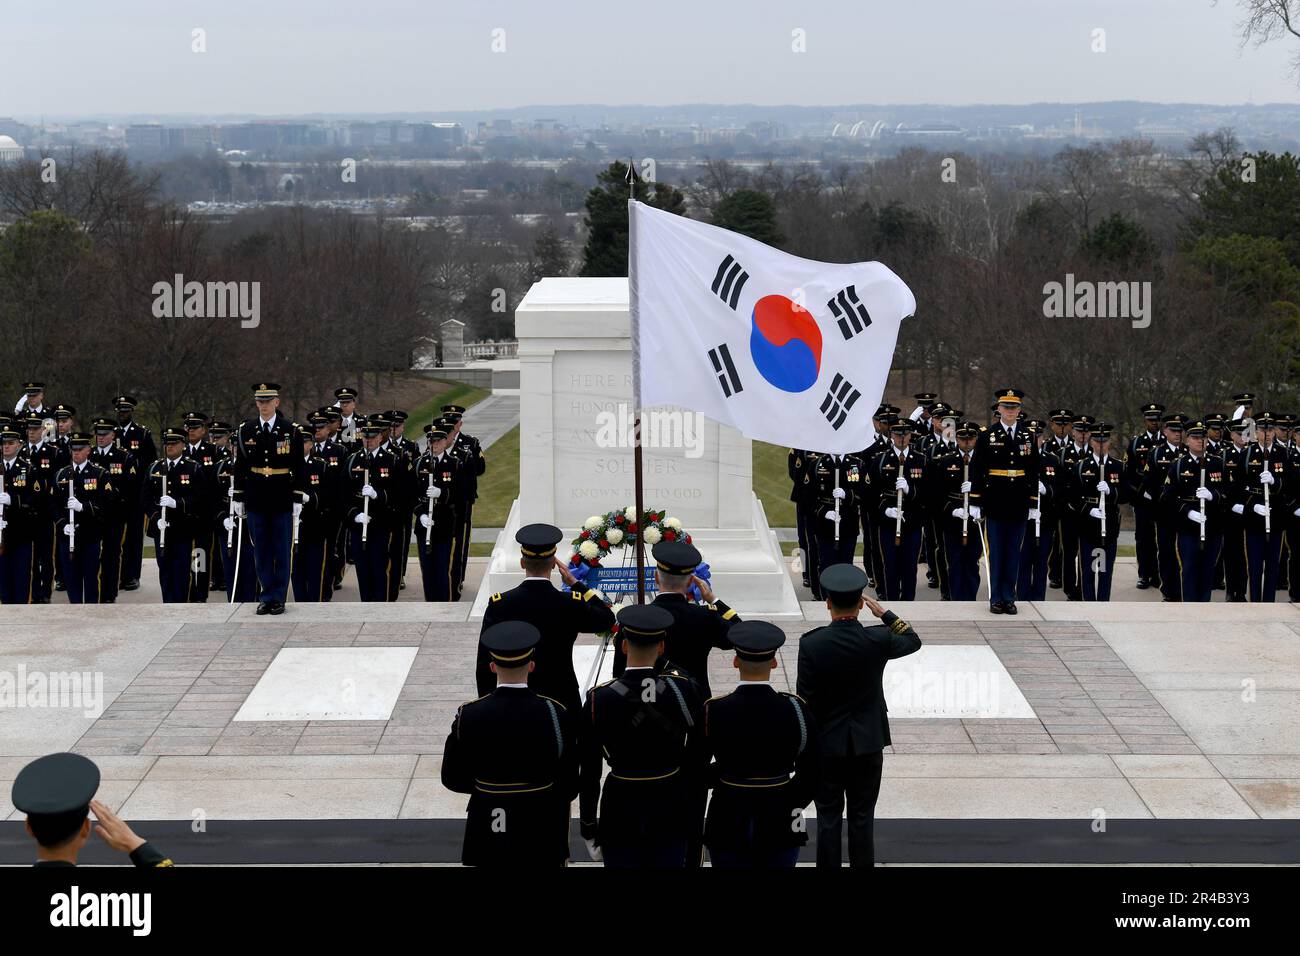 General Park Jeong Hwan, Chief of Staff of the Republic of Korea Army lays a wreath at the Tomb of the Unknown Soldier at Arlington National Cemetery in Arlington, Va, Jan 25, 2023. U.S. Army Maj. Gen. Allan M. Pepin, commanding general, Joint Task Force- National Capital Region and U.S. Army Military District of Washington, hosted this Army Full Honor Wreath-Laying Ceremony. Stock Photo